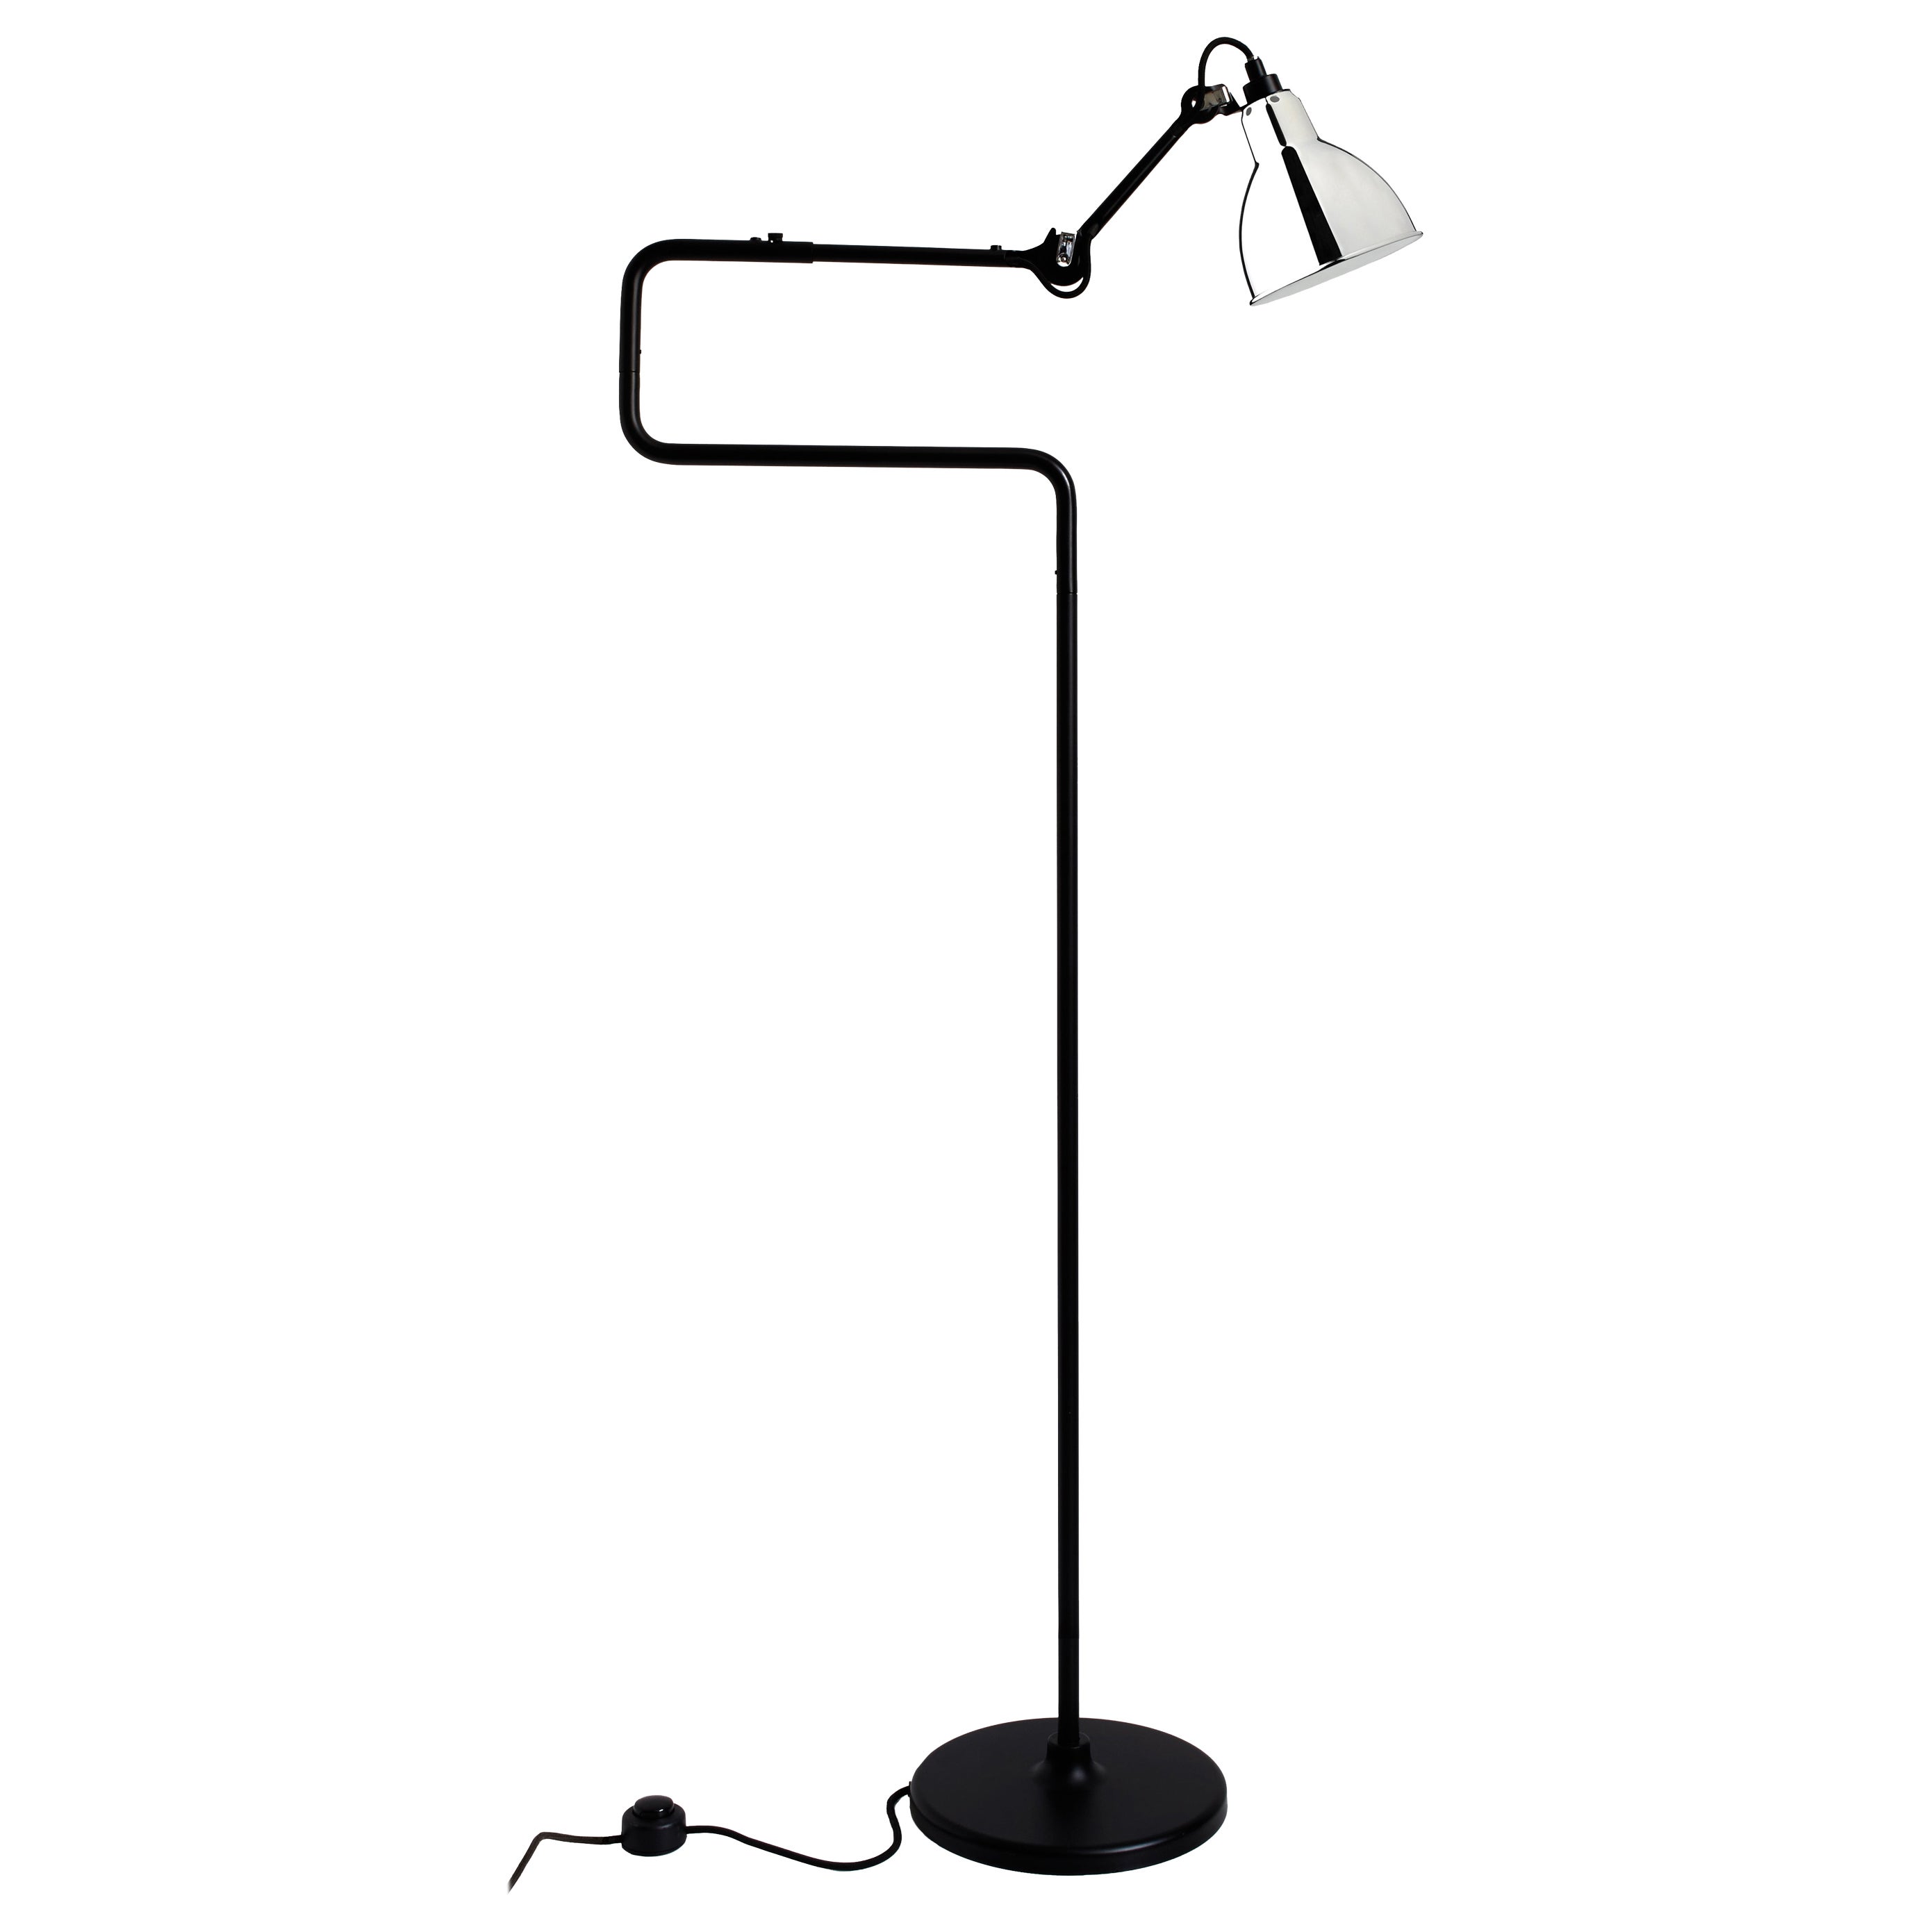 DCW Editions La Lampe Gras N°411 Floor Lamp in Black Arm and Chrome Shade